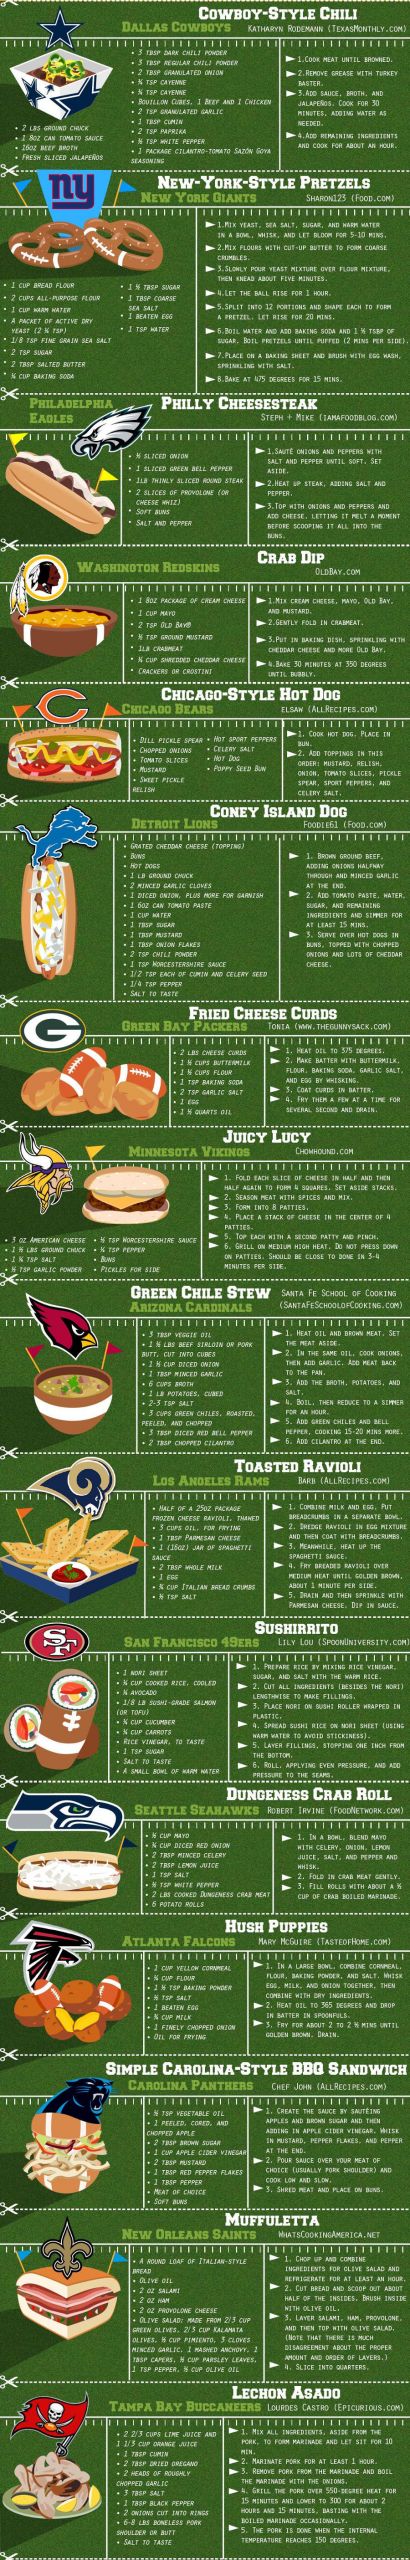 Football Dinners Recipes
 Tailgating Finger Food Recipes for Each NFL Team